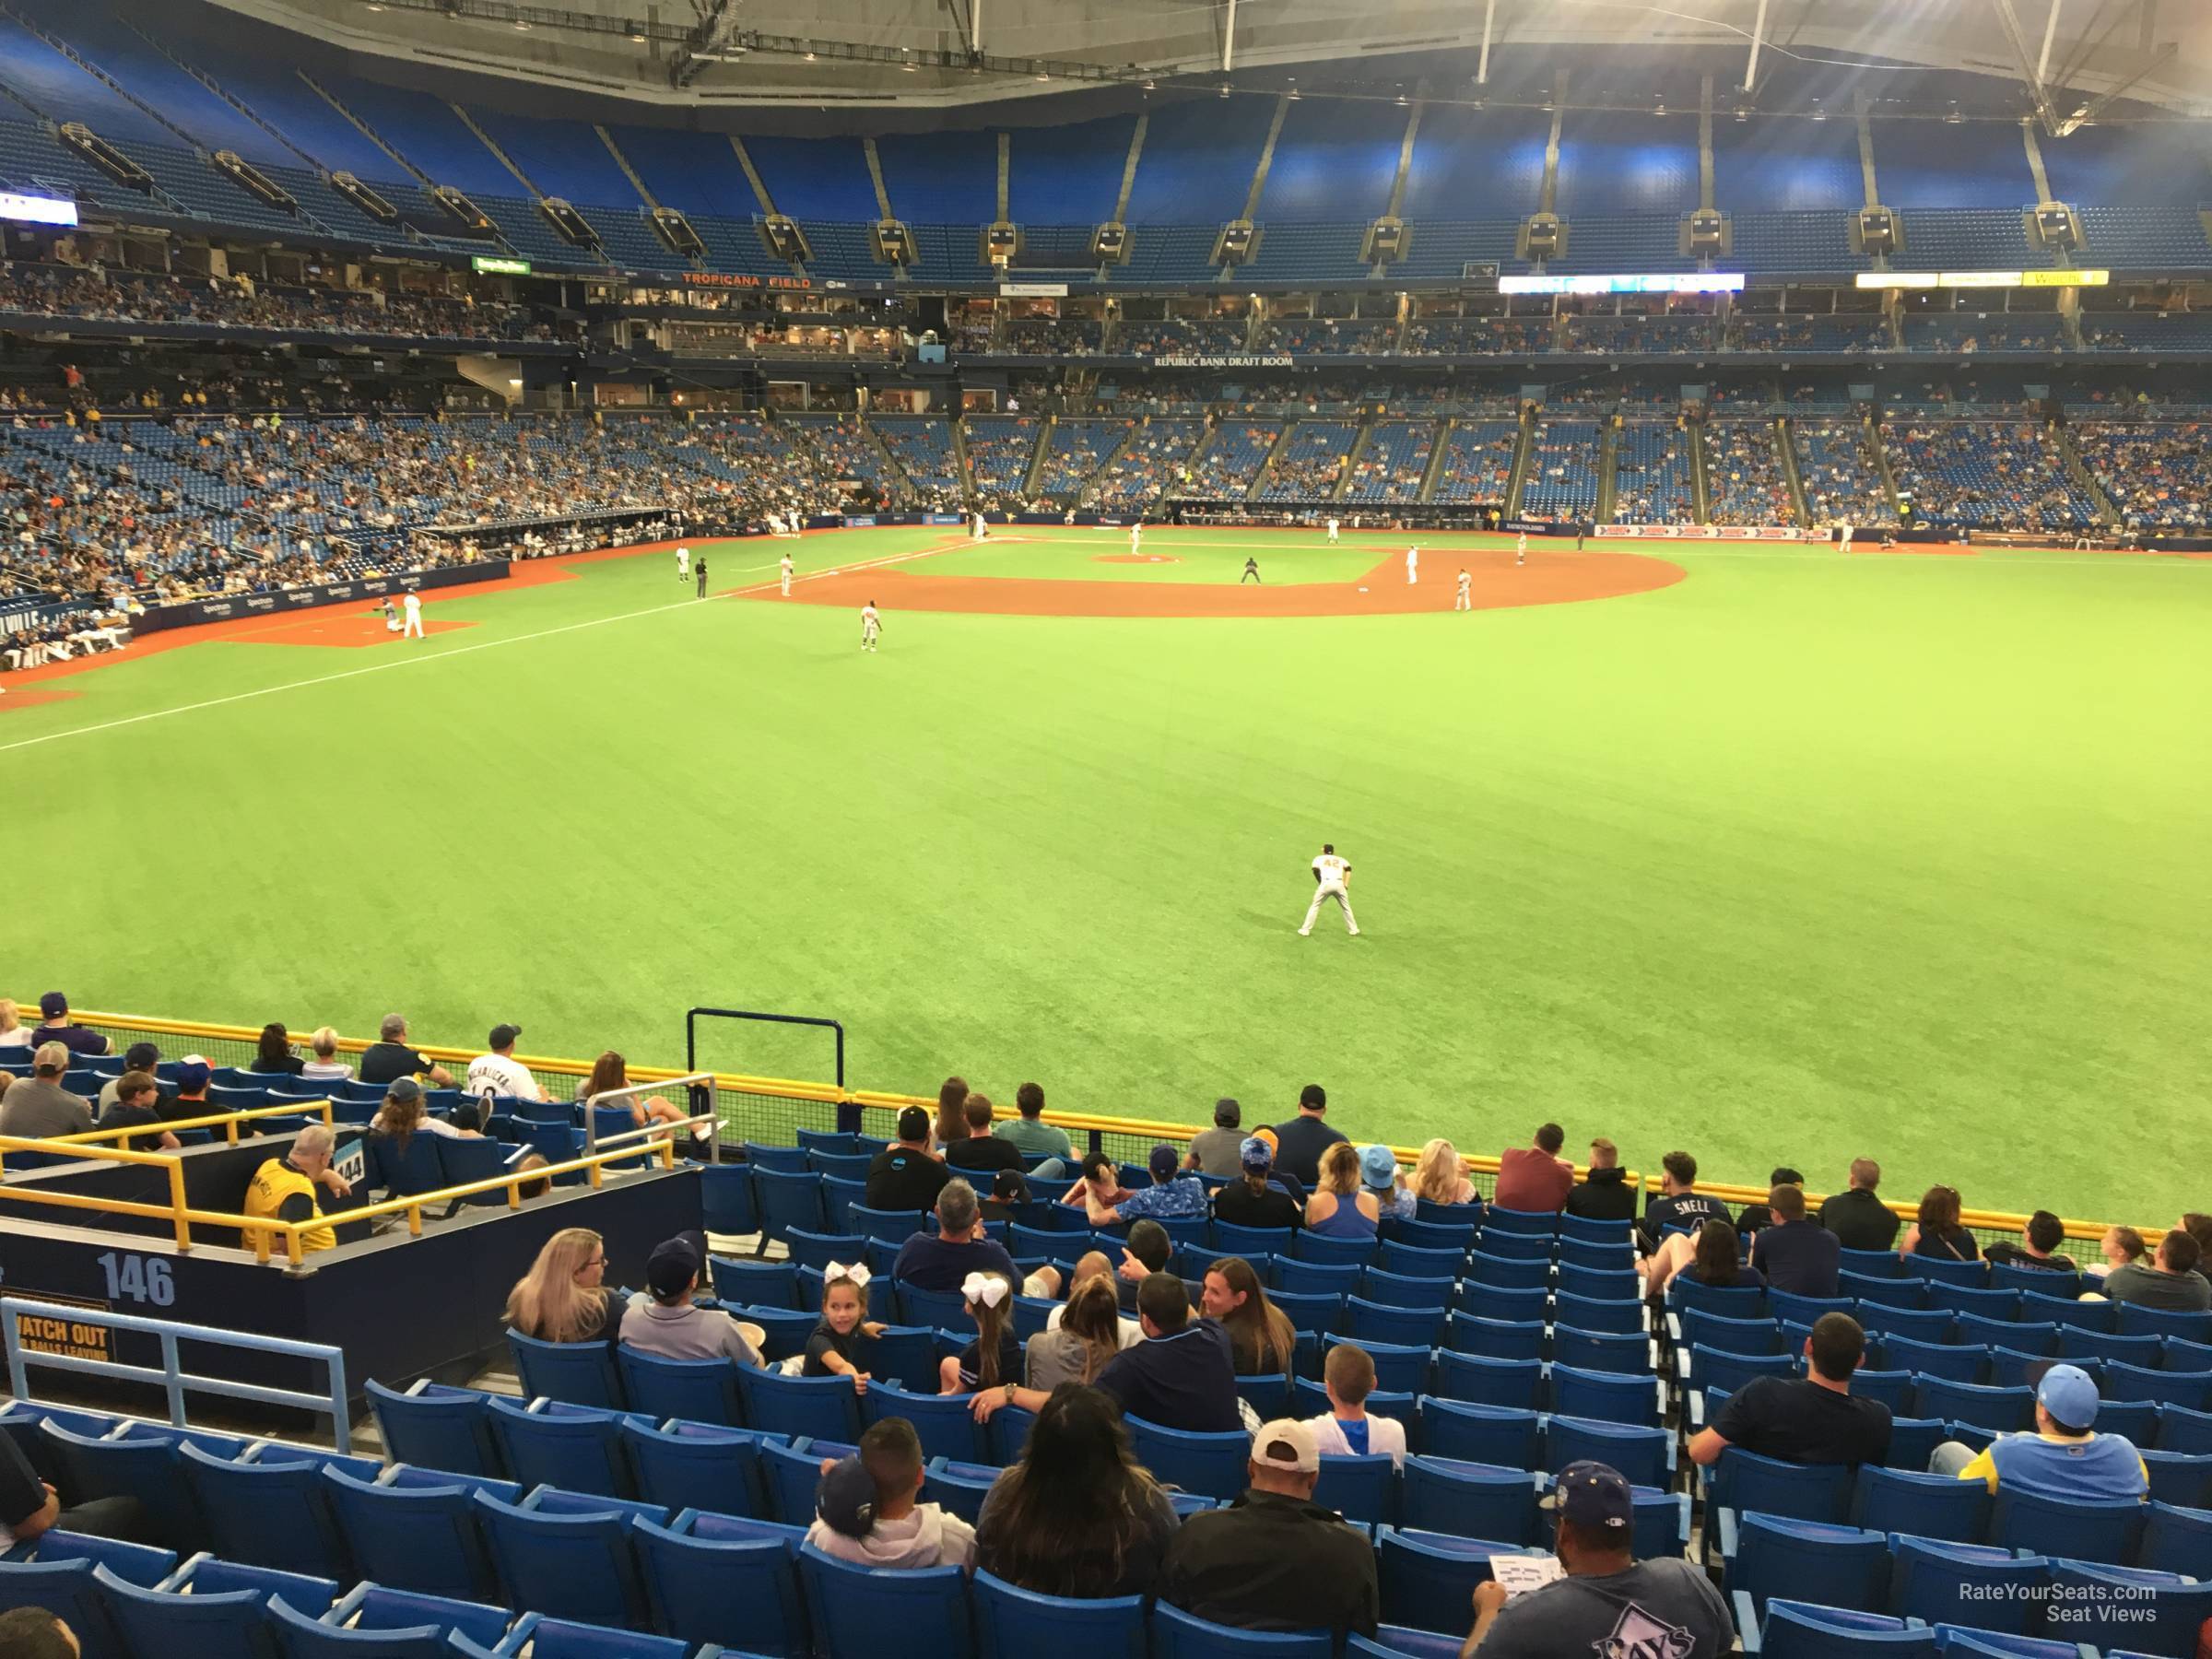 Tropicana Field Seating Chart With Rows And Seat Numbers Elcho Table